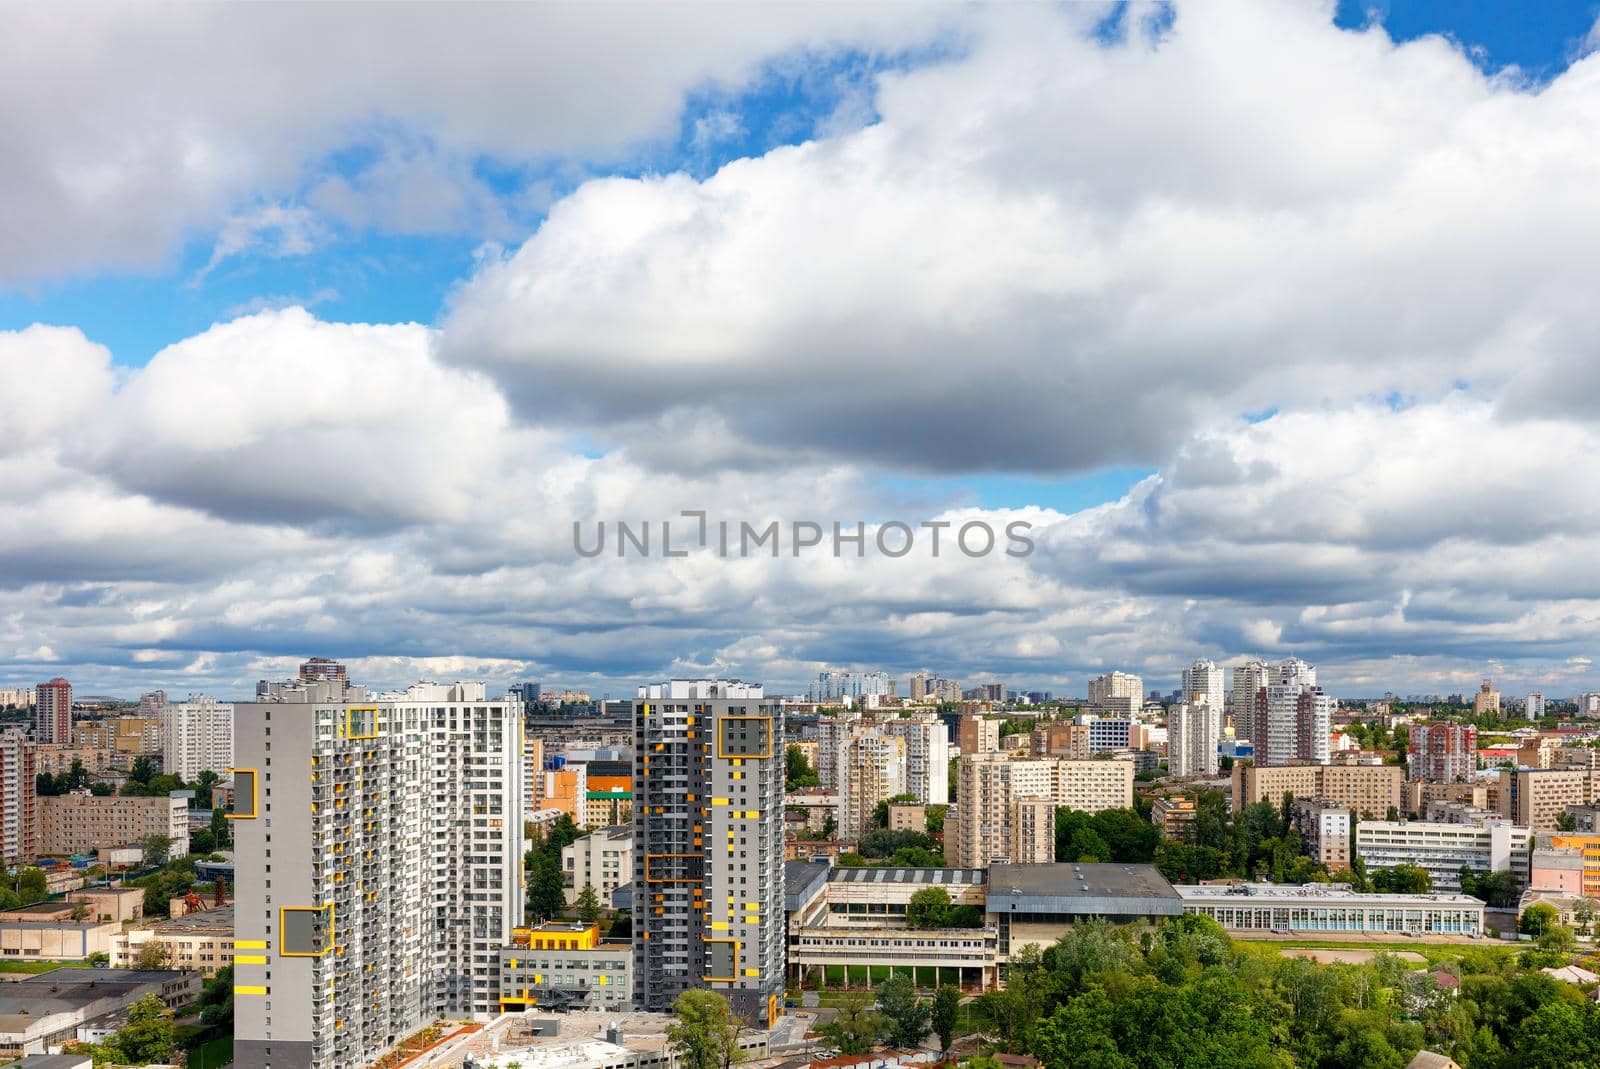 An urban landscape with high and low architecture under a beautiful dramatic sky with dense thick clouds.